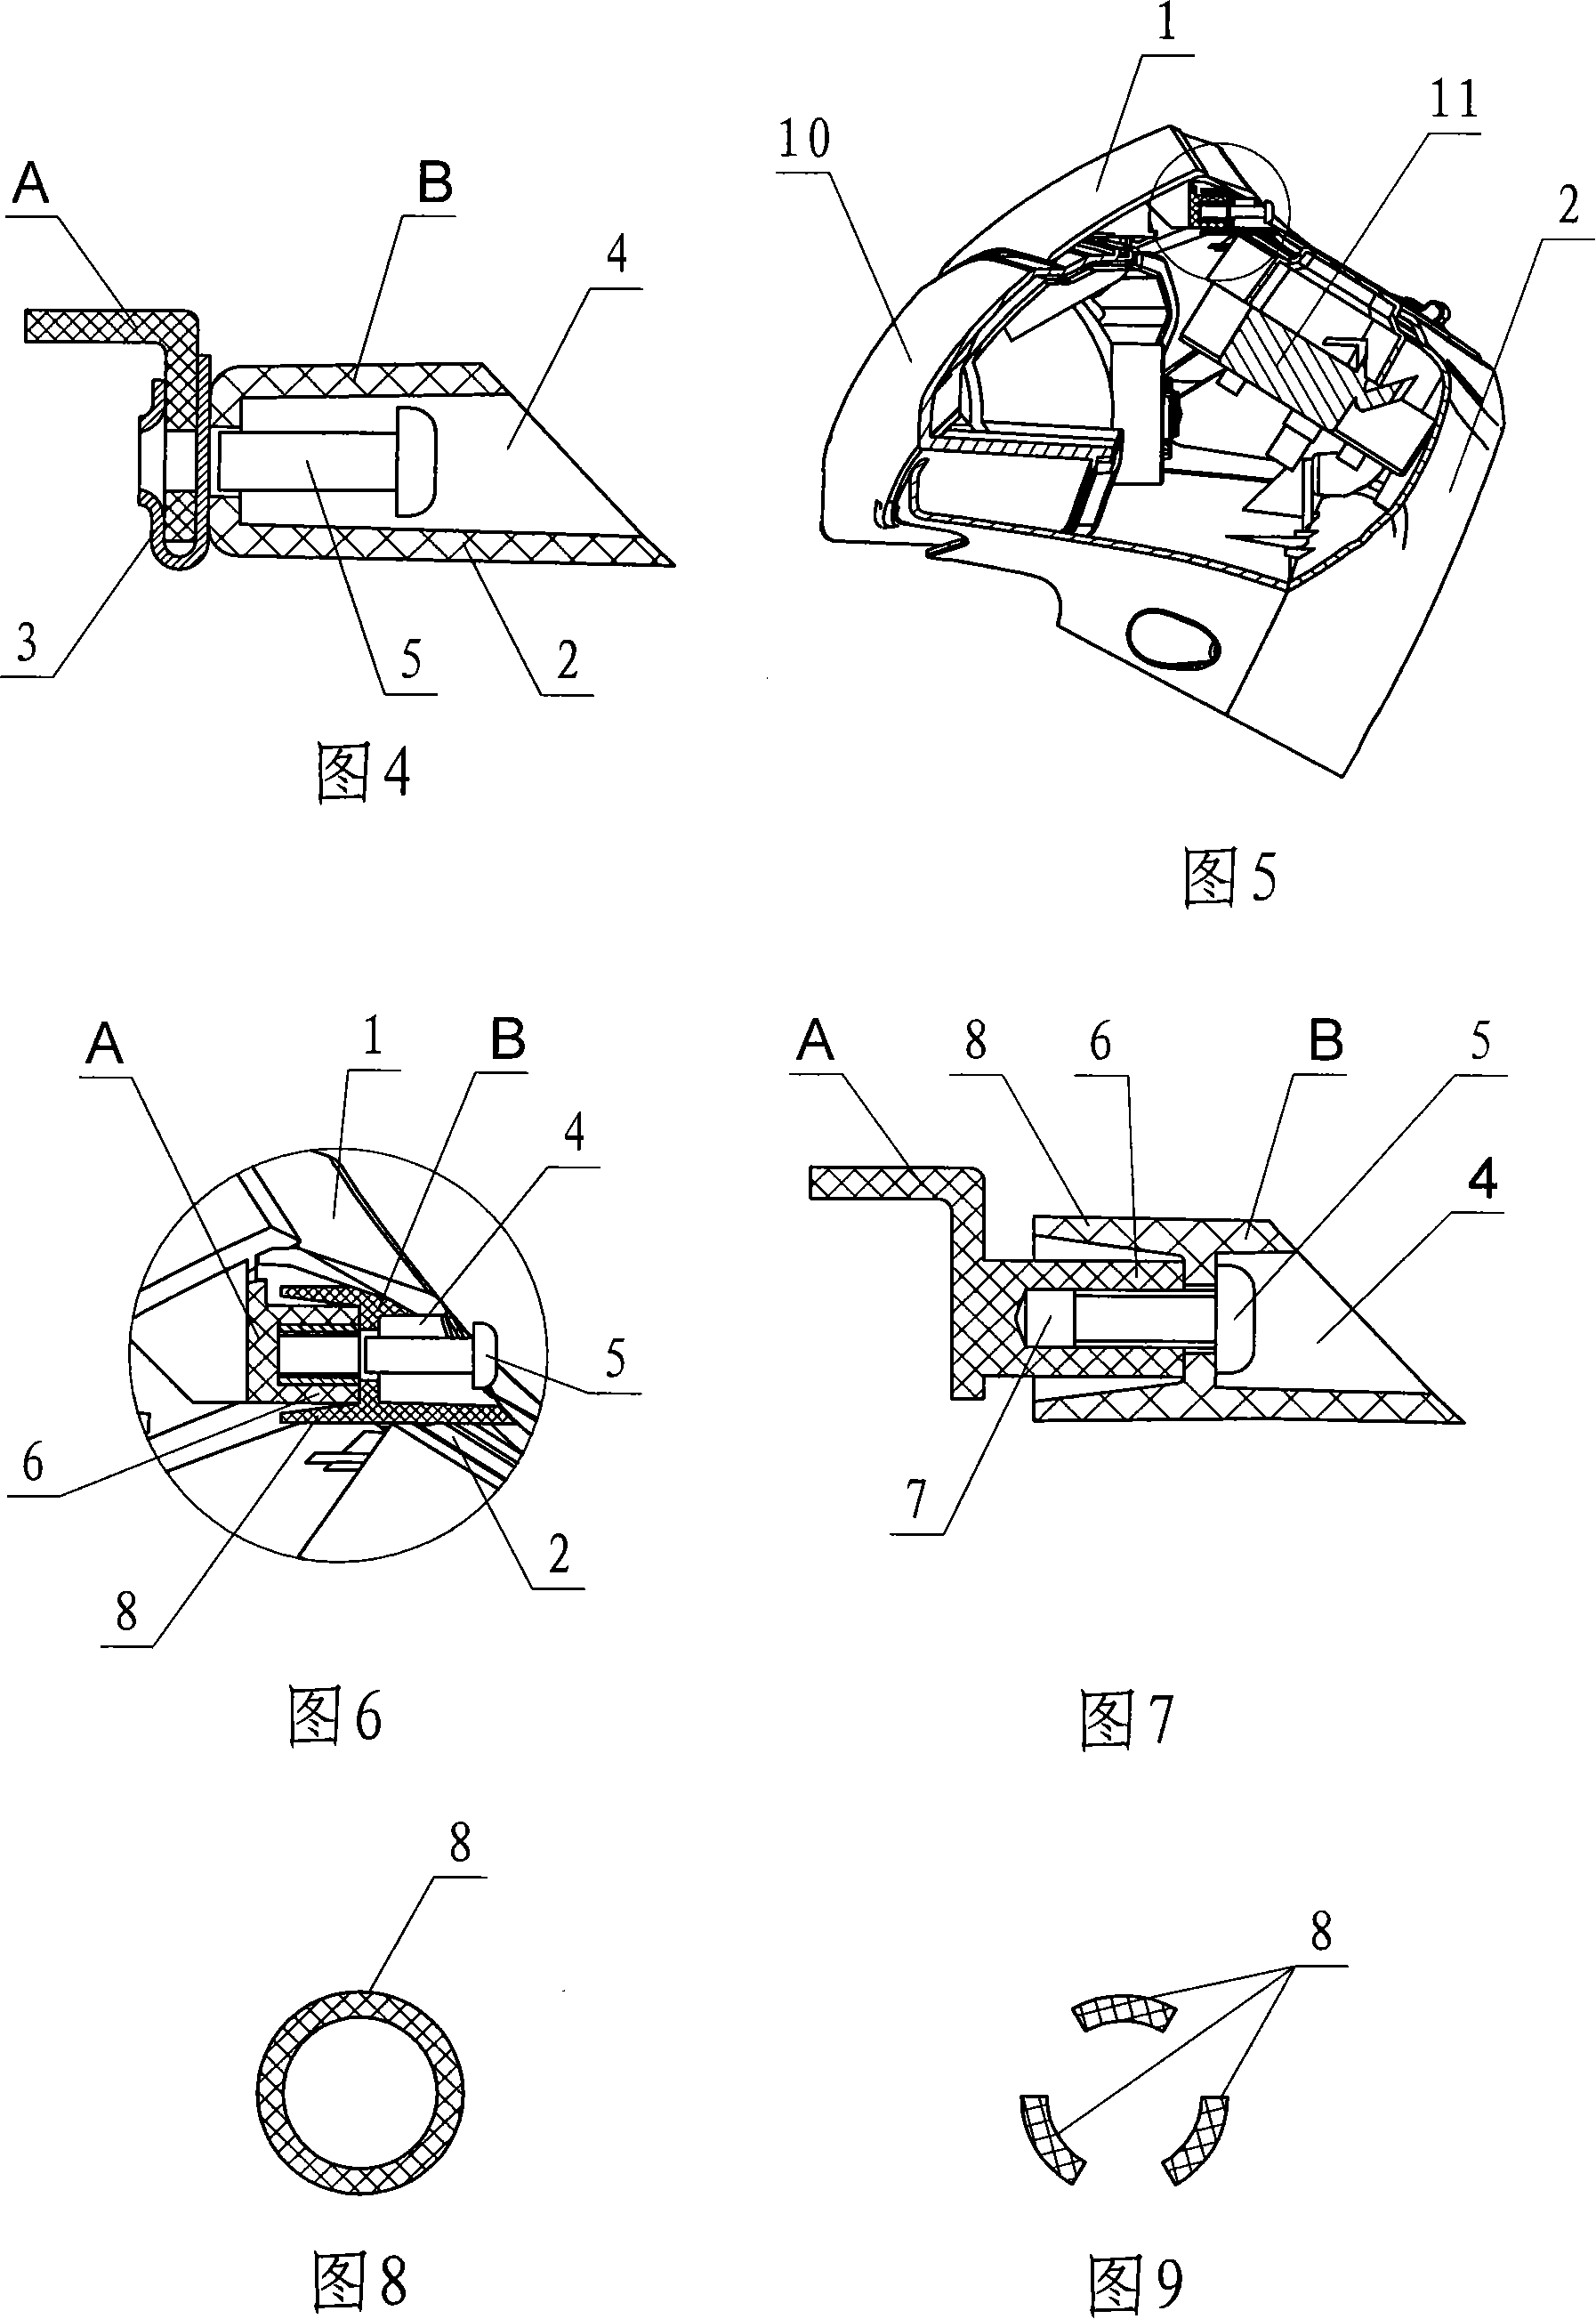 Motorbicycle lamp shade mounting and connection structure